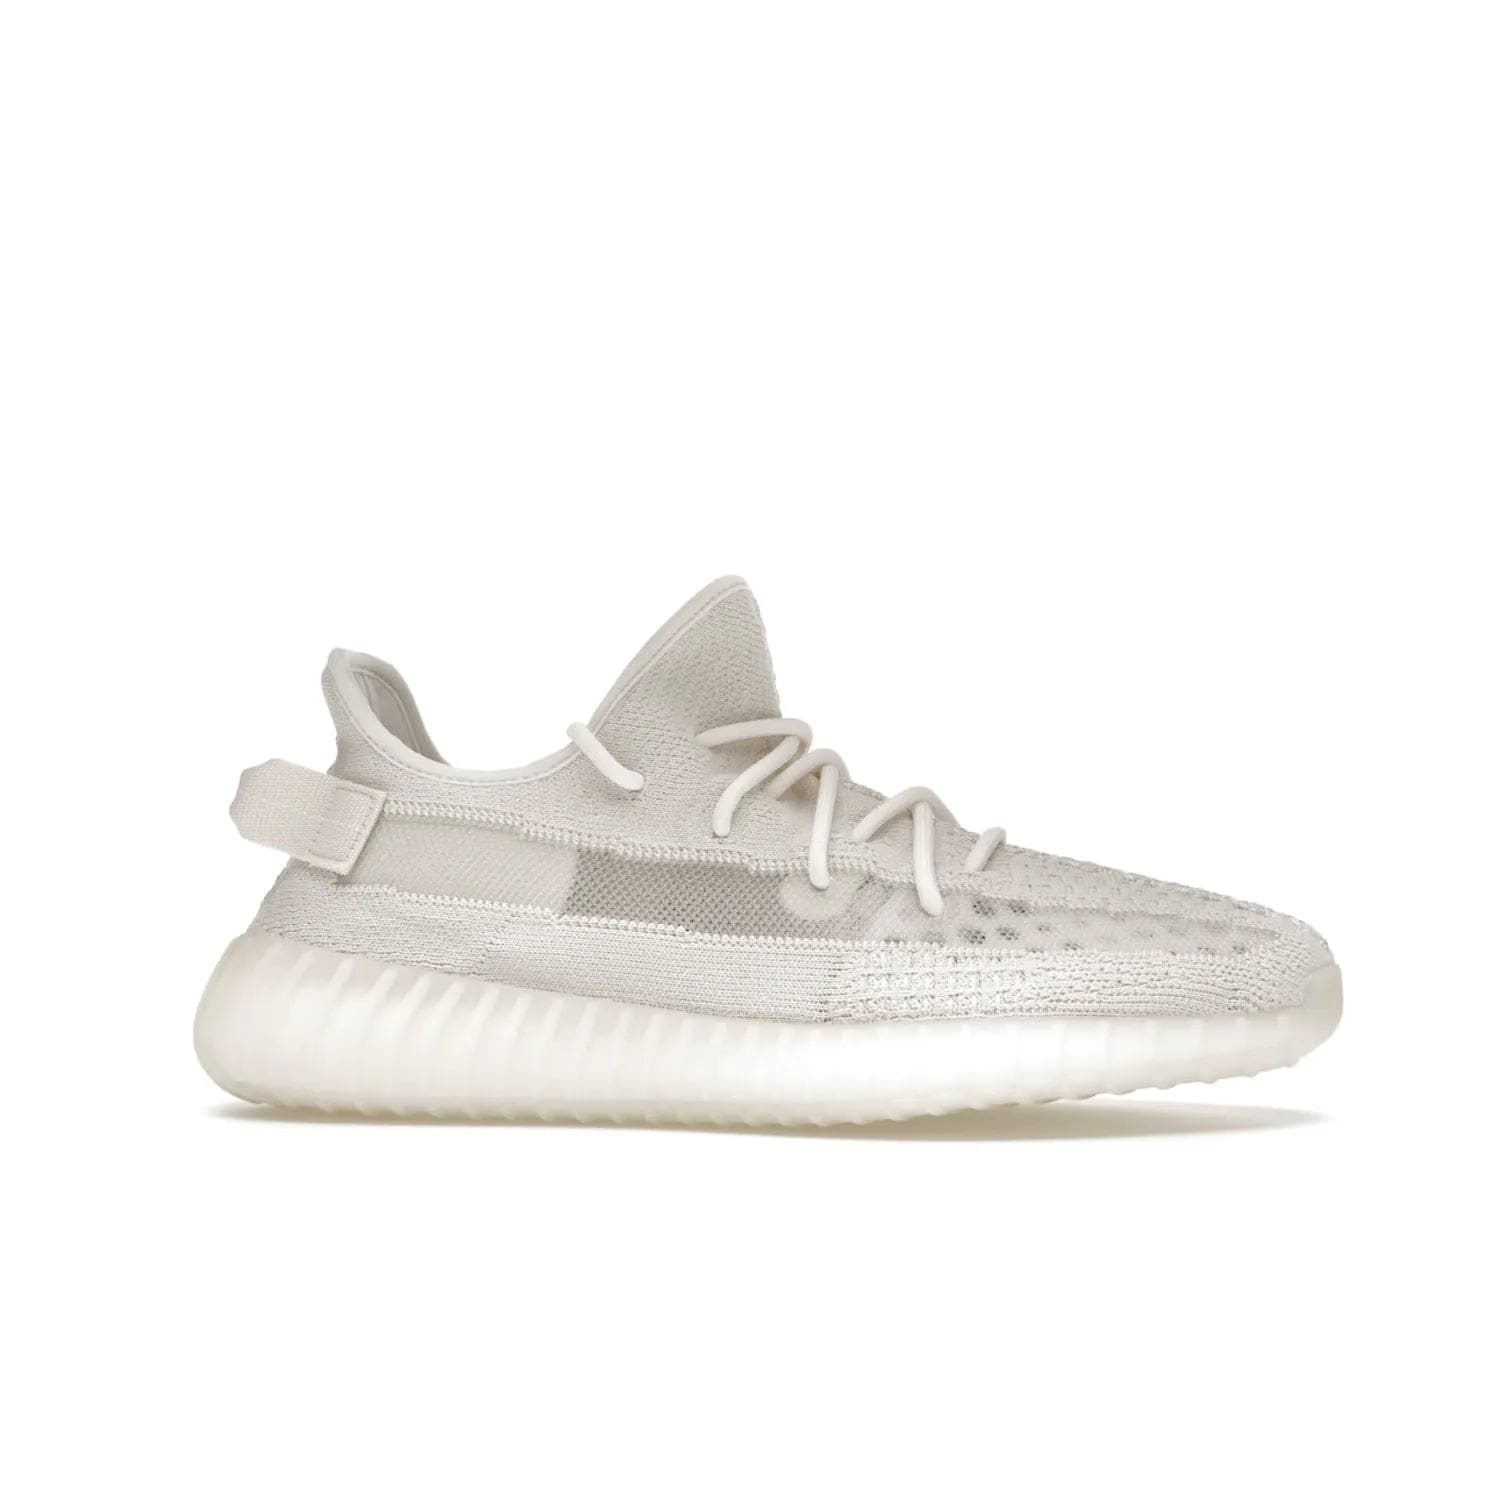 adidas Yeezy Boost 350 V2 Bone - Image 2 - Only at www.BallersClubKickz.com - Grab the stylish and comfortable adidas Yeezy Boost 350 V2 Bone in March 2022. This sneaker features a triple white Primeknit upper, mesh side stripes and canvas heel tabs, sitting atop a semi-translucent sole with Boost technology. Sure to keep your feet comfortable and stylish!